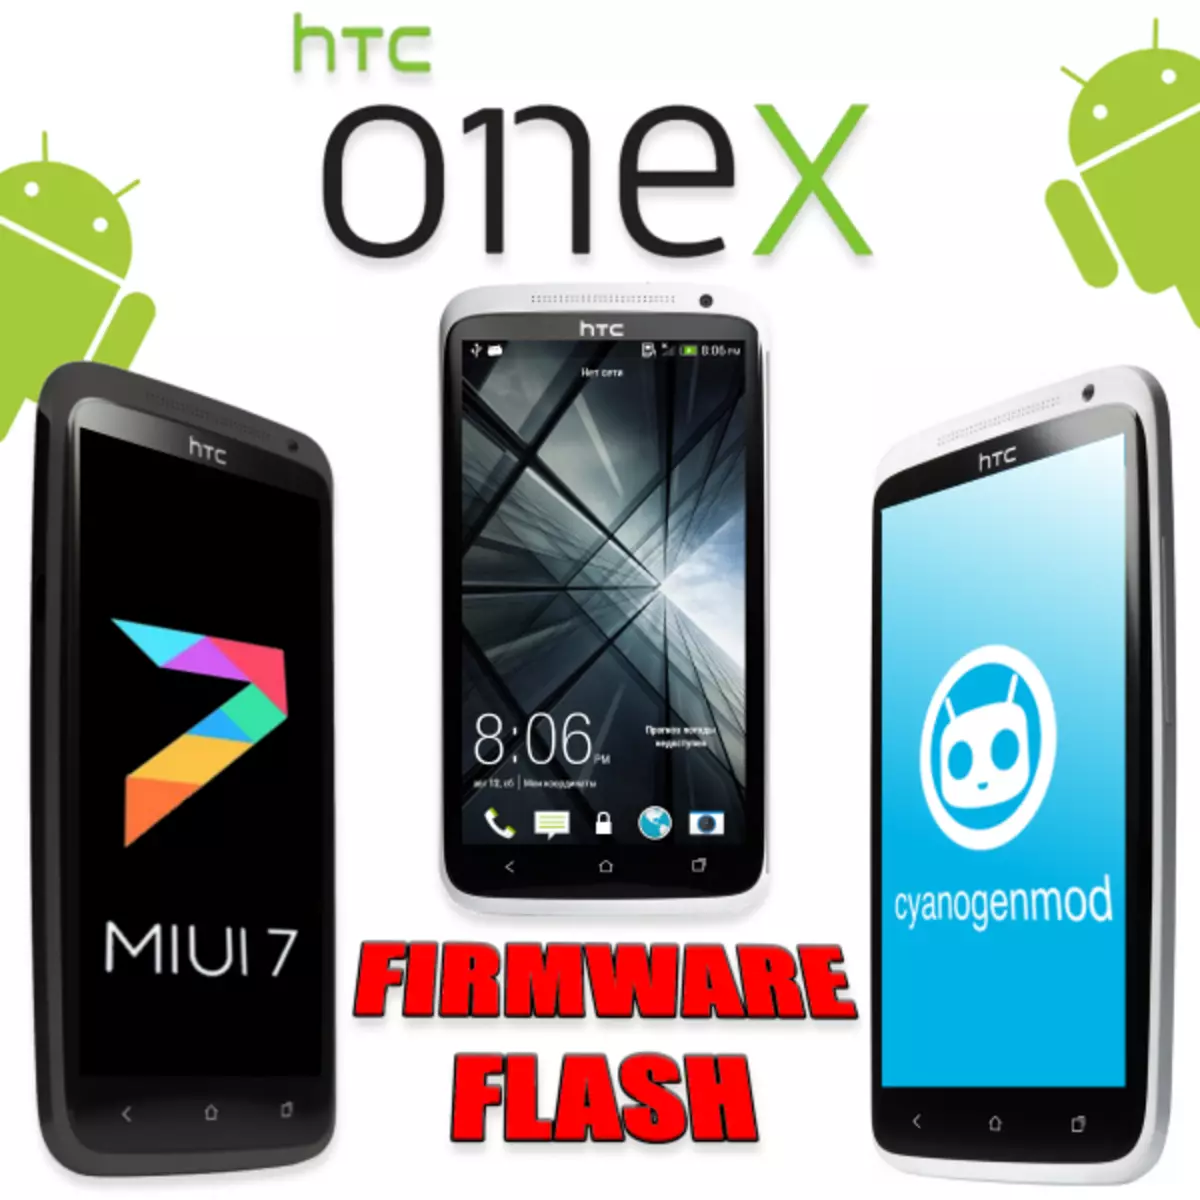 How to Flash HTC One X (S720E)